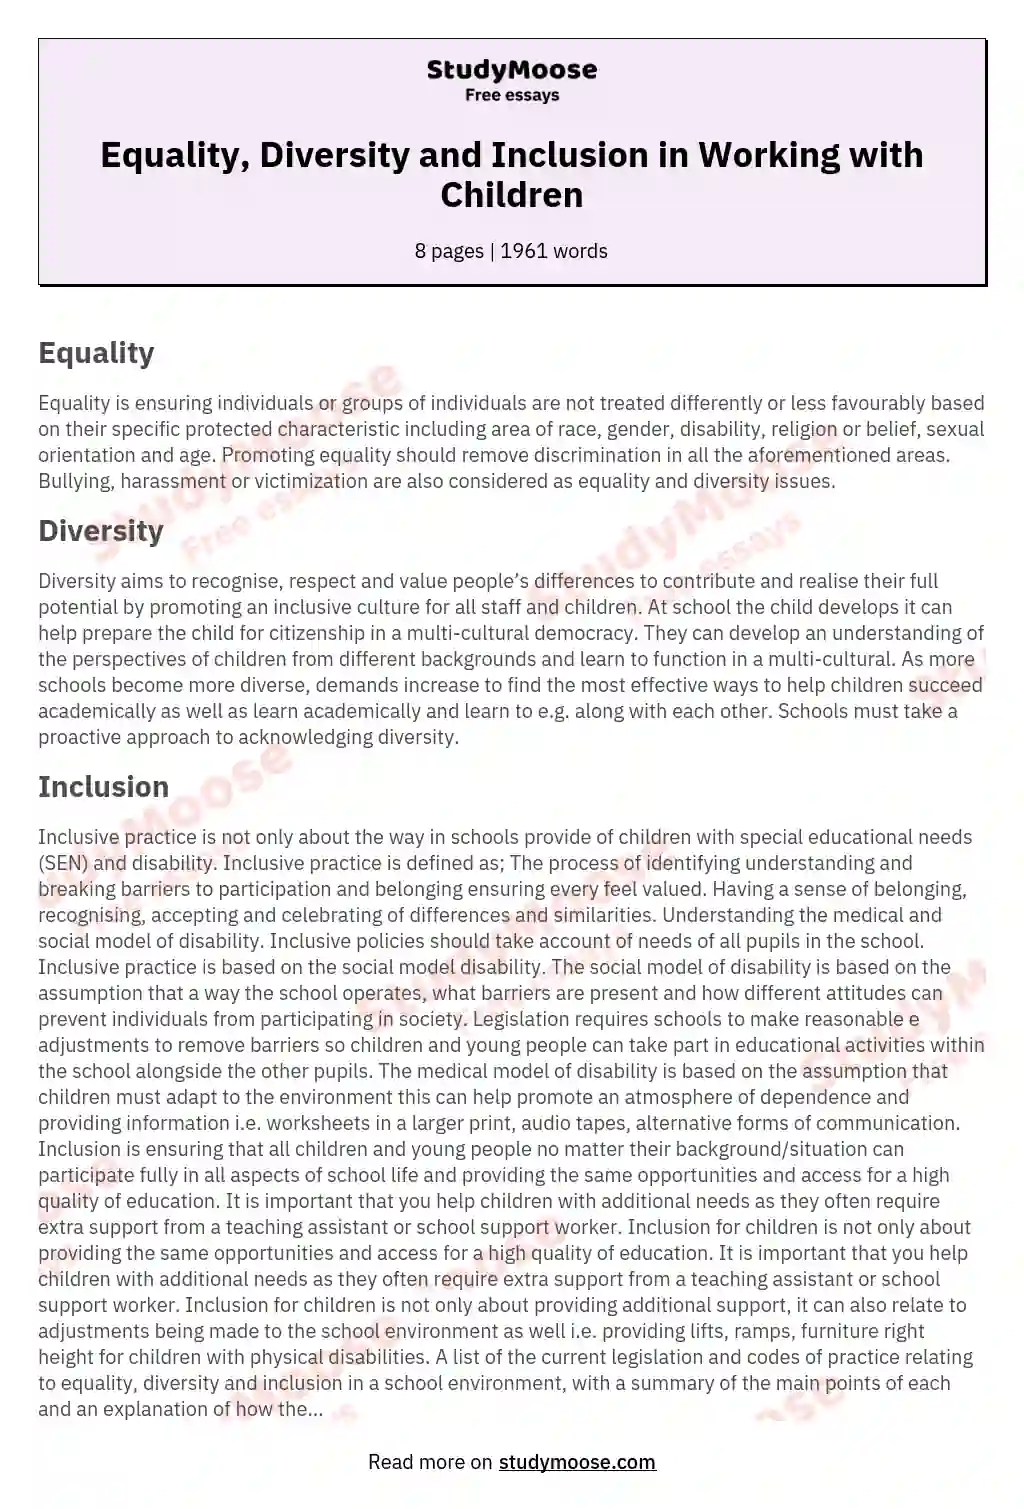 Equality, Diversity and Inclusion in Working with Children essay